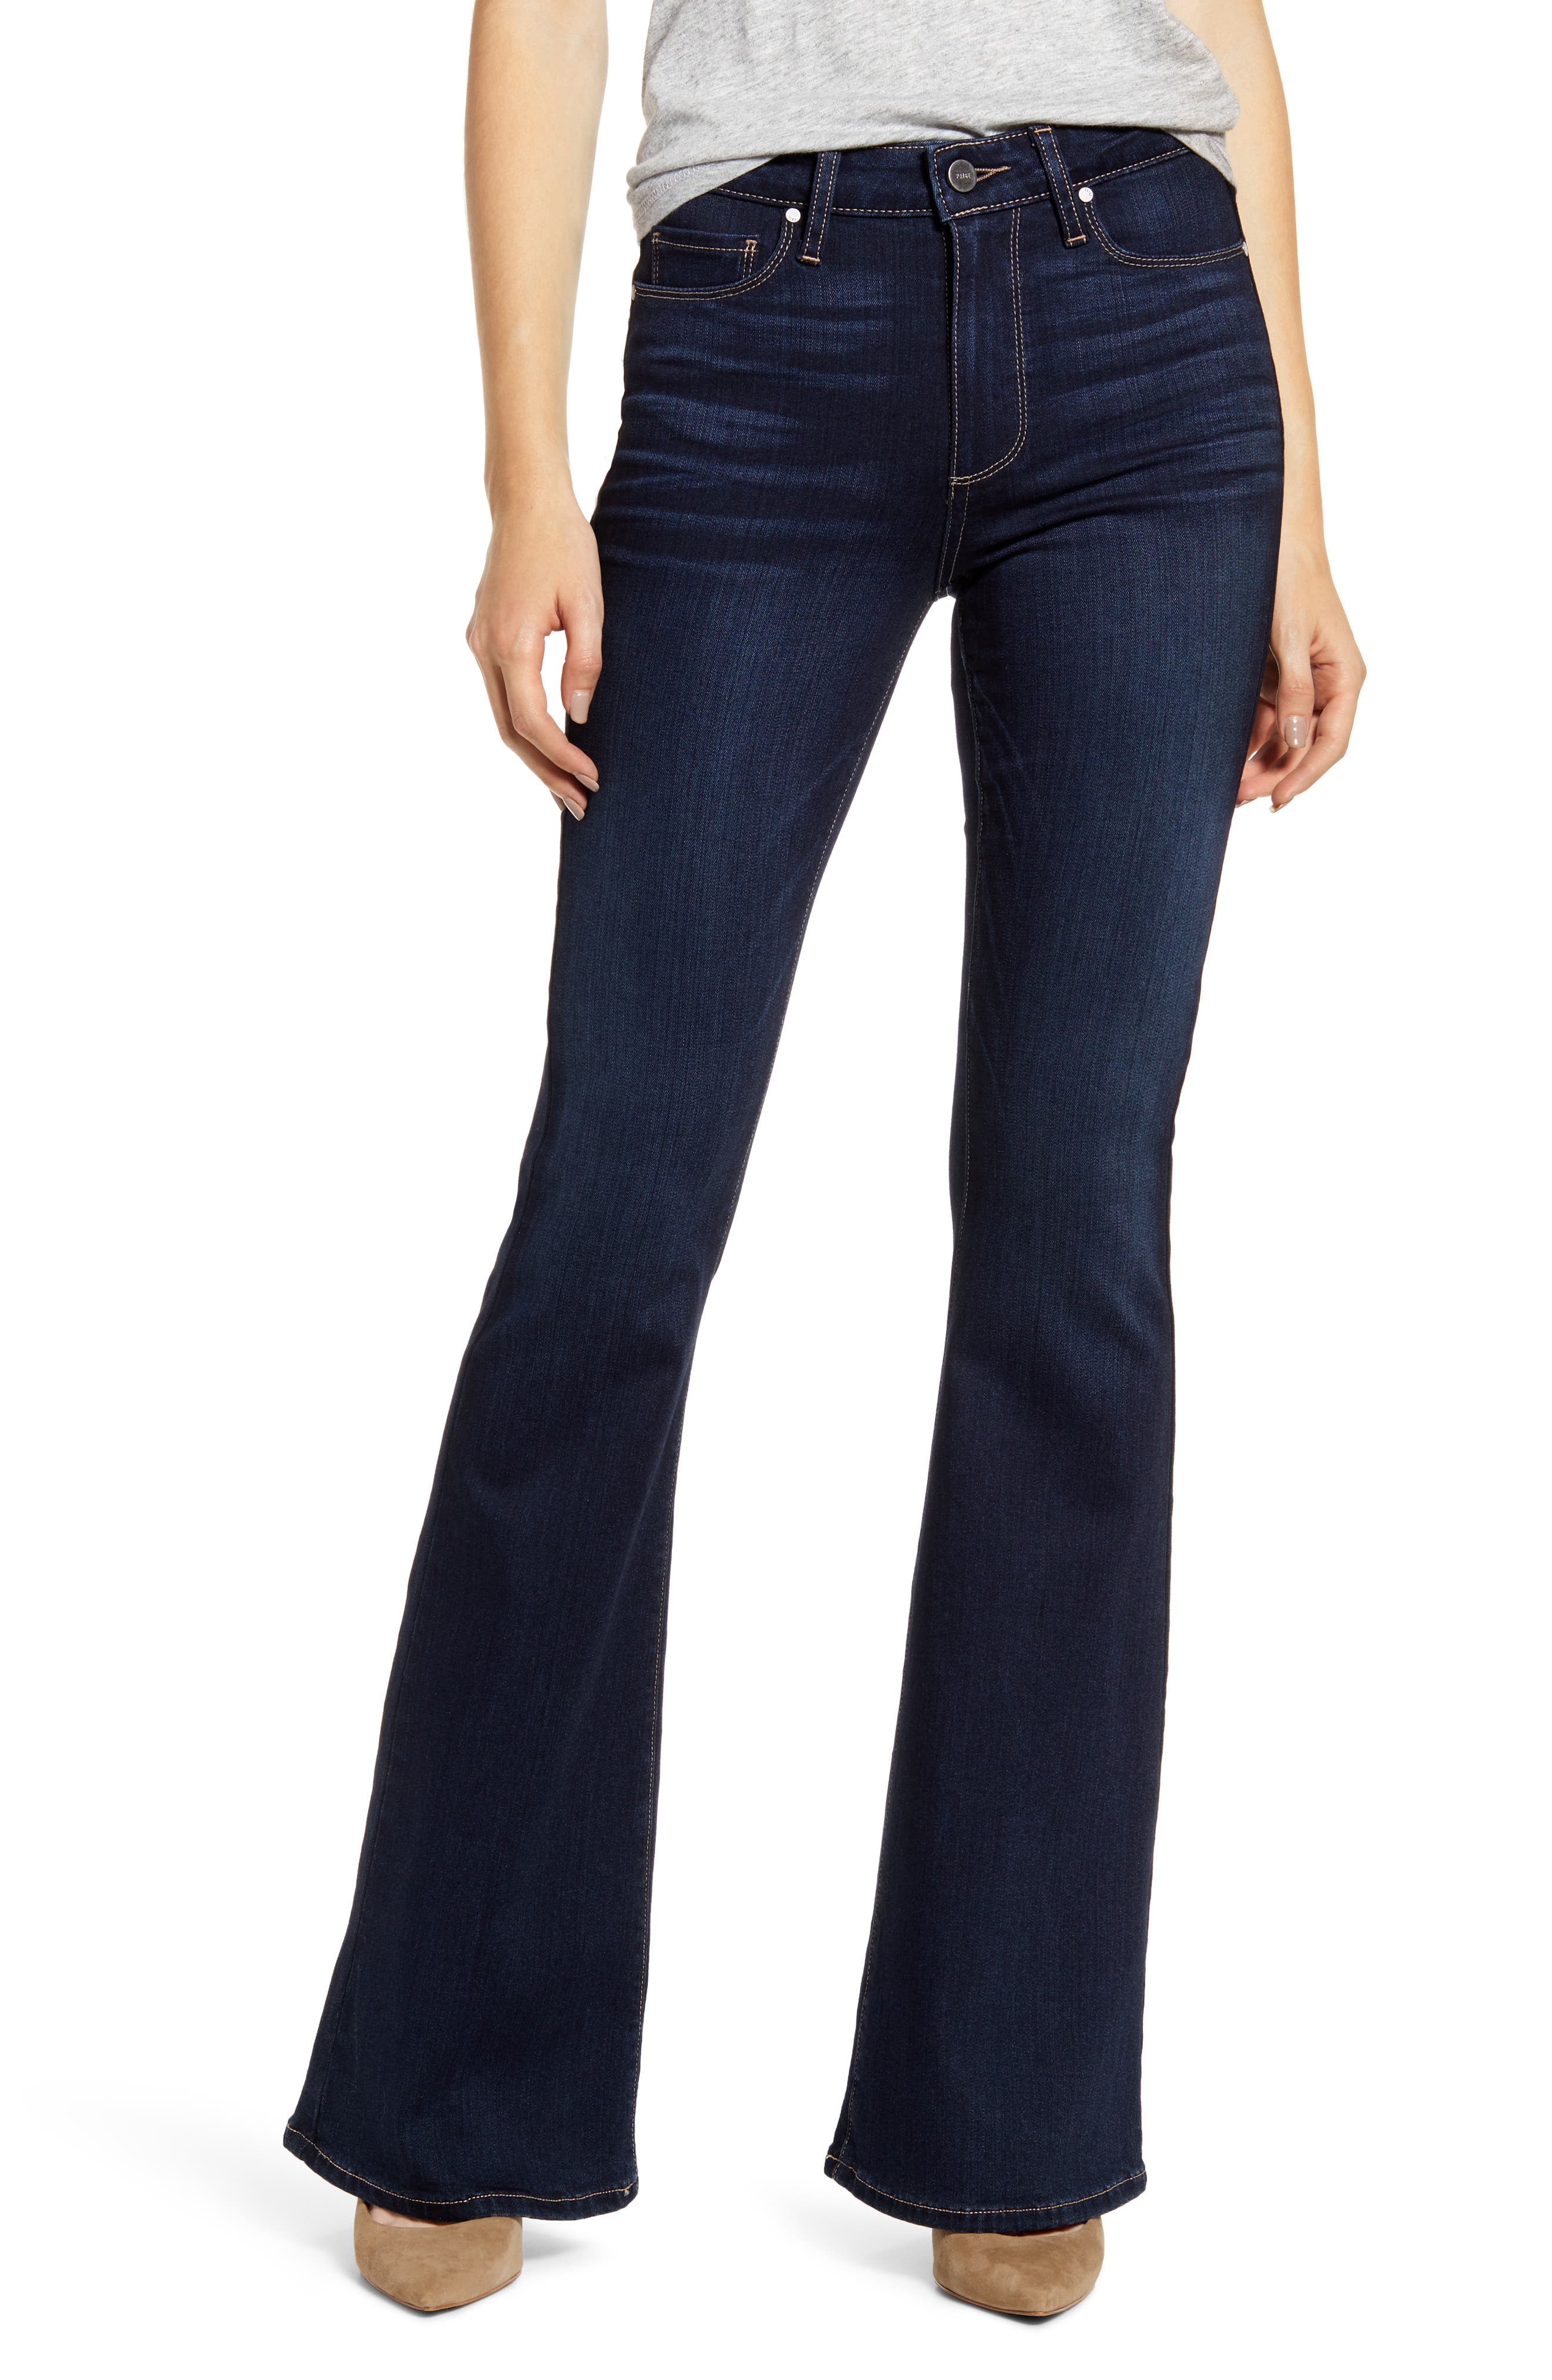 paige canyon flare jeans